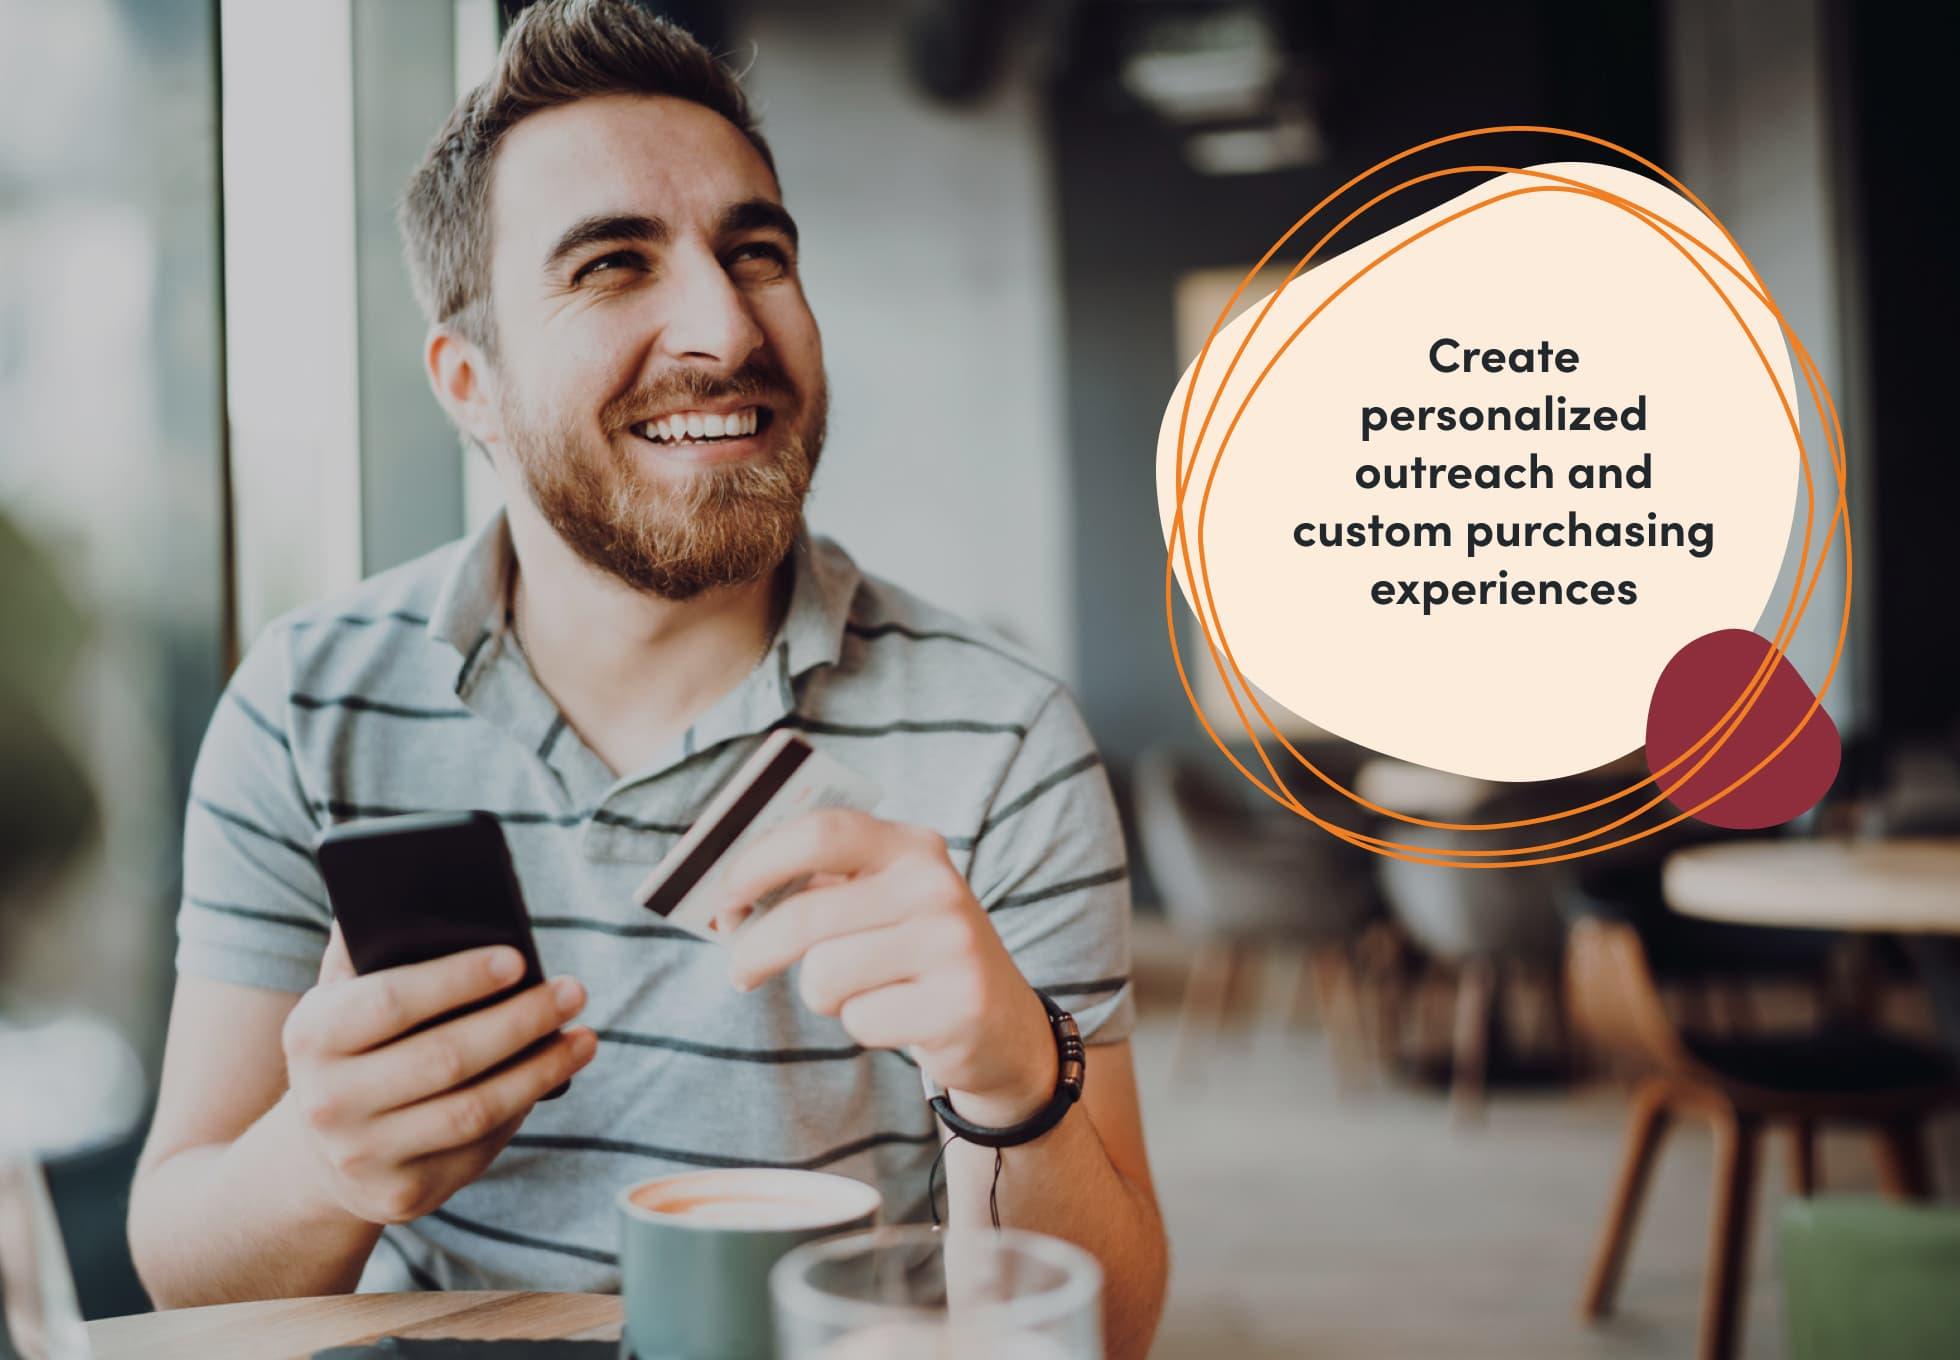 A person in a coffee shop holding their cellphone in one hand and a credit card in another. A sentence imposed on top of the image says, "Create personalized outreach and custom purchasing experiences."